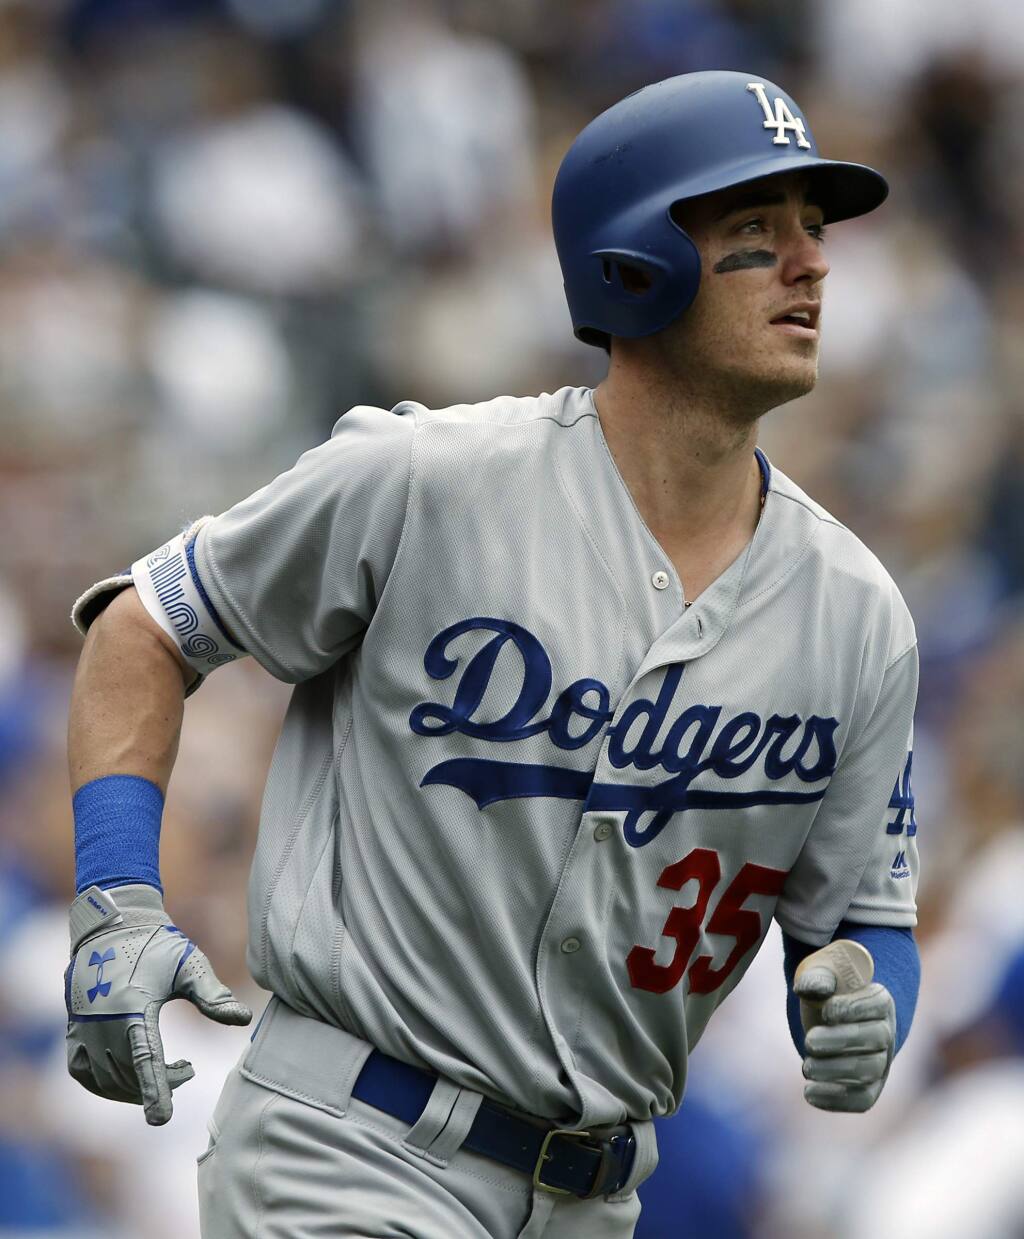 Hernández: Cody Bellinger says he's still an MVP-type player. He